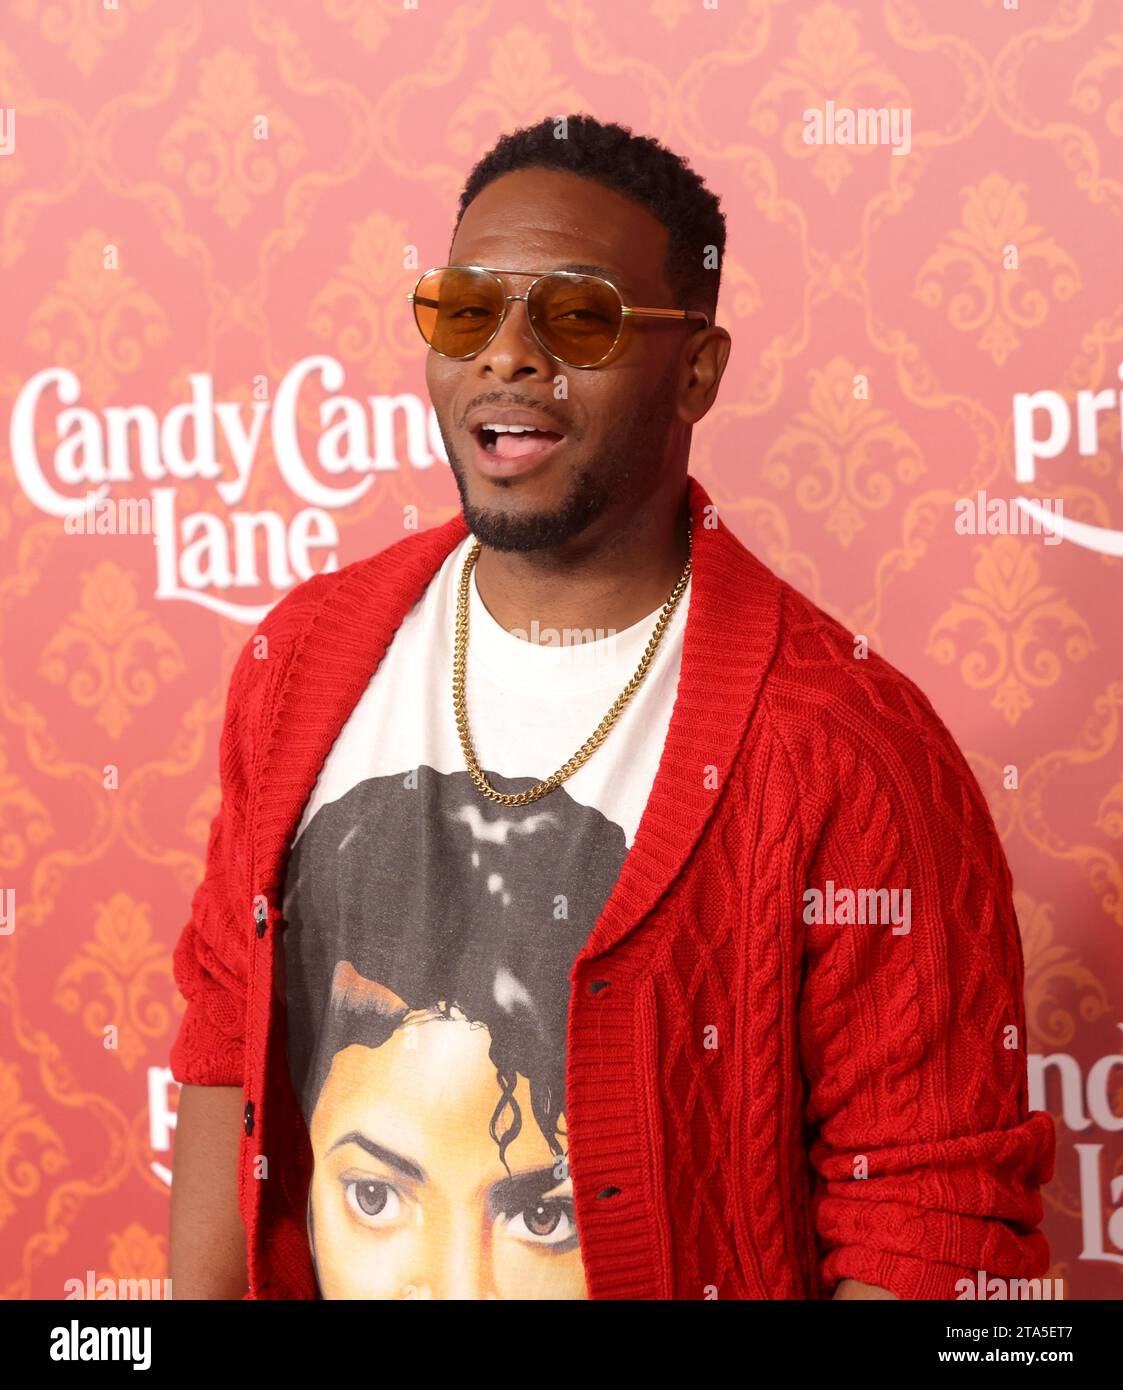 Los Angeles, United States. 28th Nov, 2023. Kel Mitchell attends the world premiere of Amazon Prime Video's 'Candy Cane Lane' at Regency Village Theatre in Los Angeles, California on November 28, 2023. Storyline: A man is determined to win the neighborhood's annual Christmas decorating contest. He makes a pact with an elf to help him win--and the elf casts a spell that brings the 12 days of Christmas to life, which brings unexpected chaos to town. Photo by Greg Grudt/UPI Credit: UPI/Alamy Live News Stock Photo